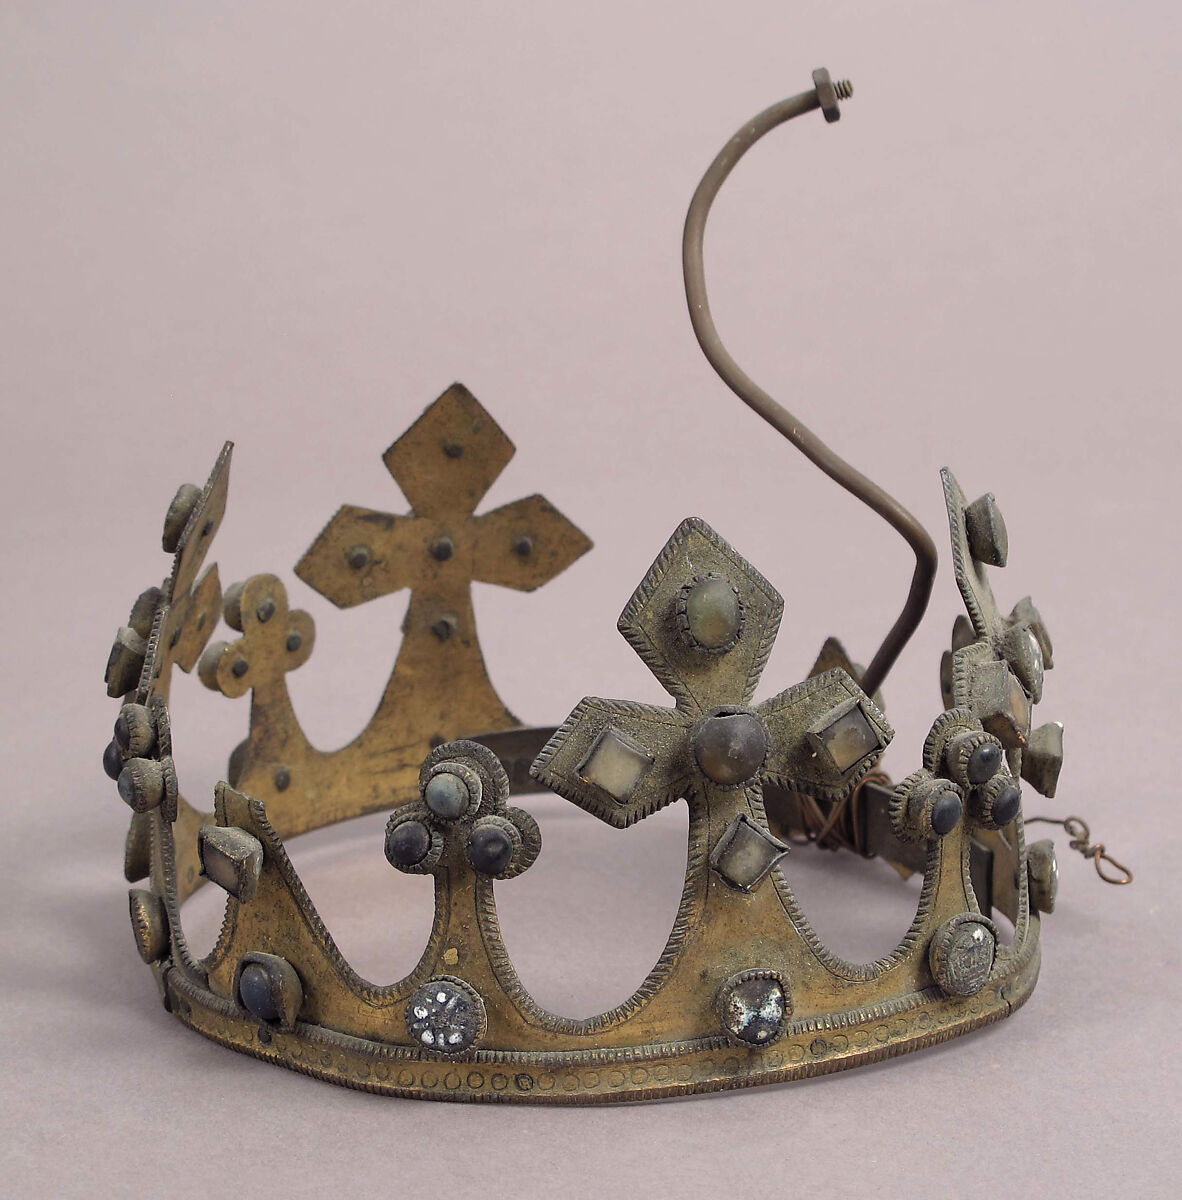 Crown, Gilt-copper alloy, enamel and glass cabochons, French 